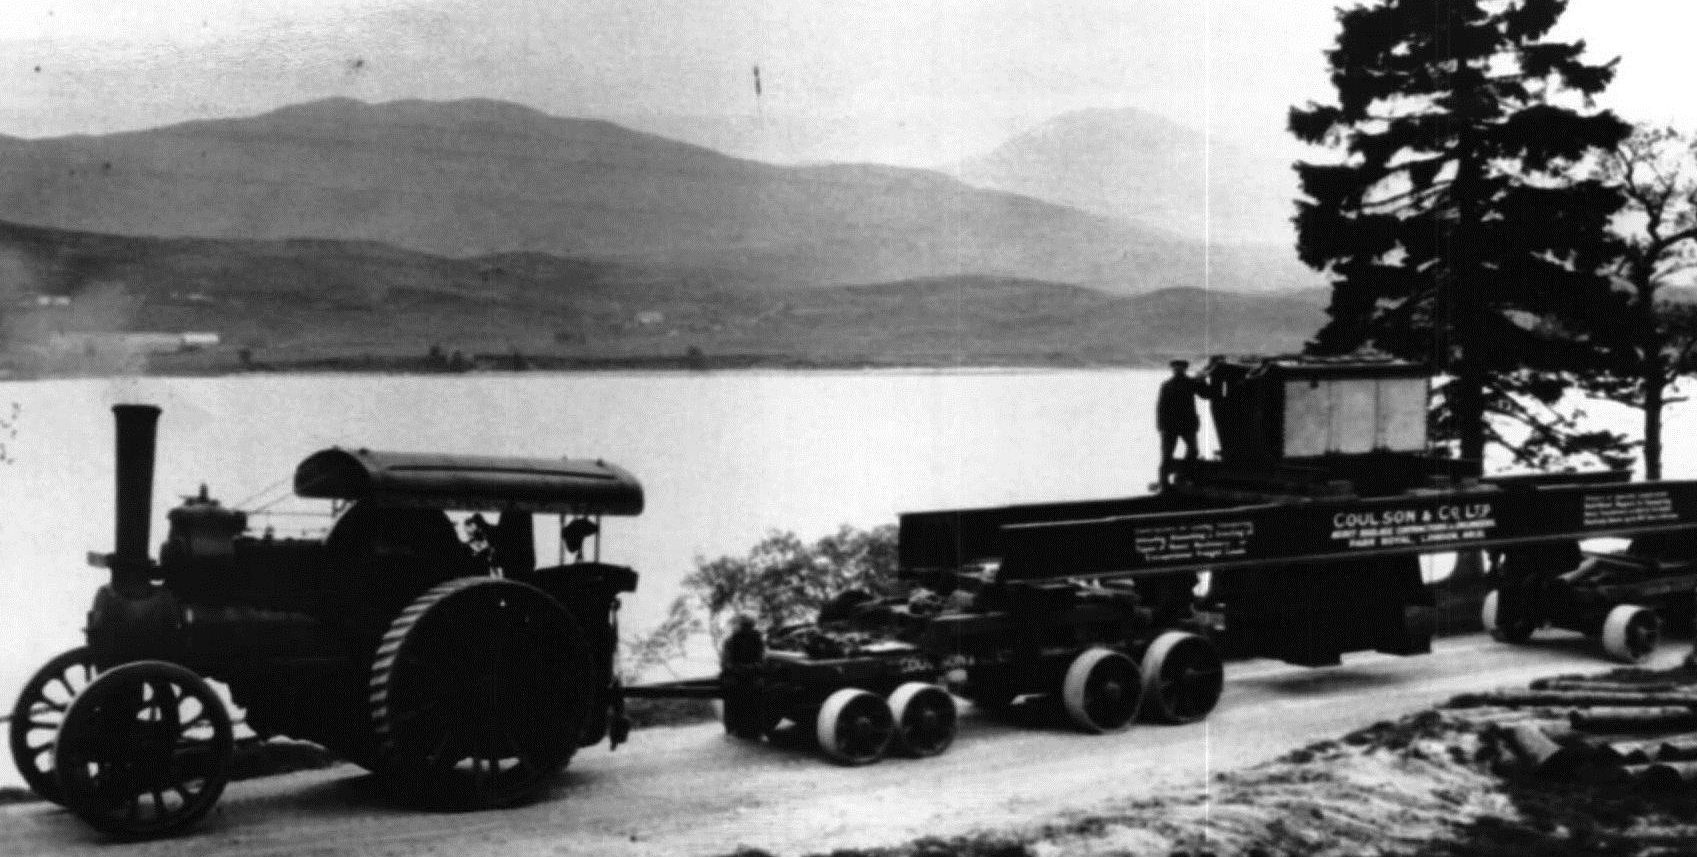 A steam engine delivers a transformer to Rannoch in the 1930s.